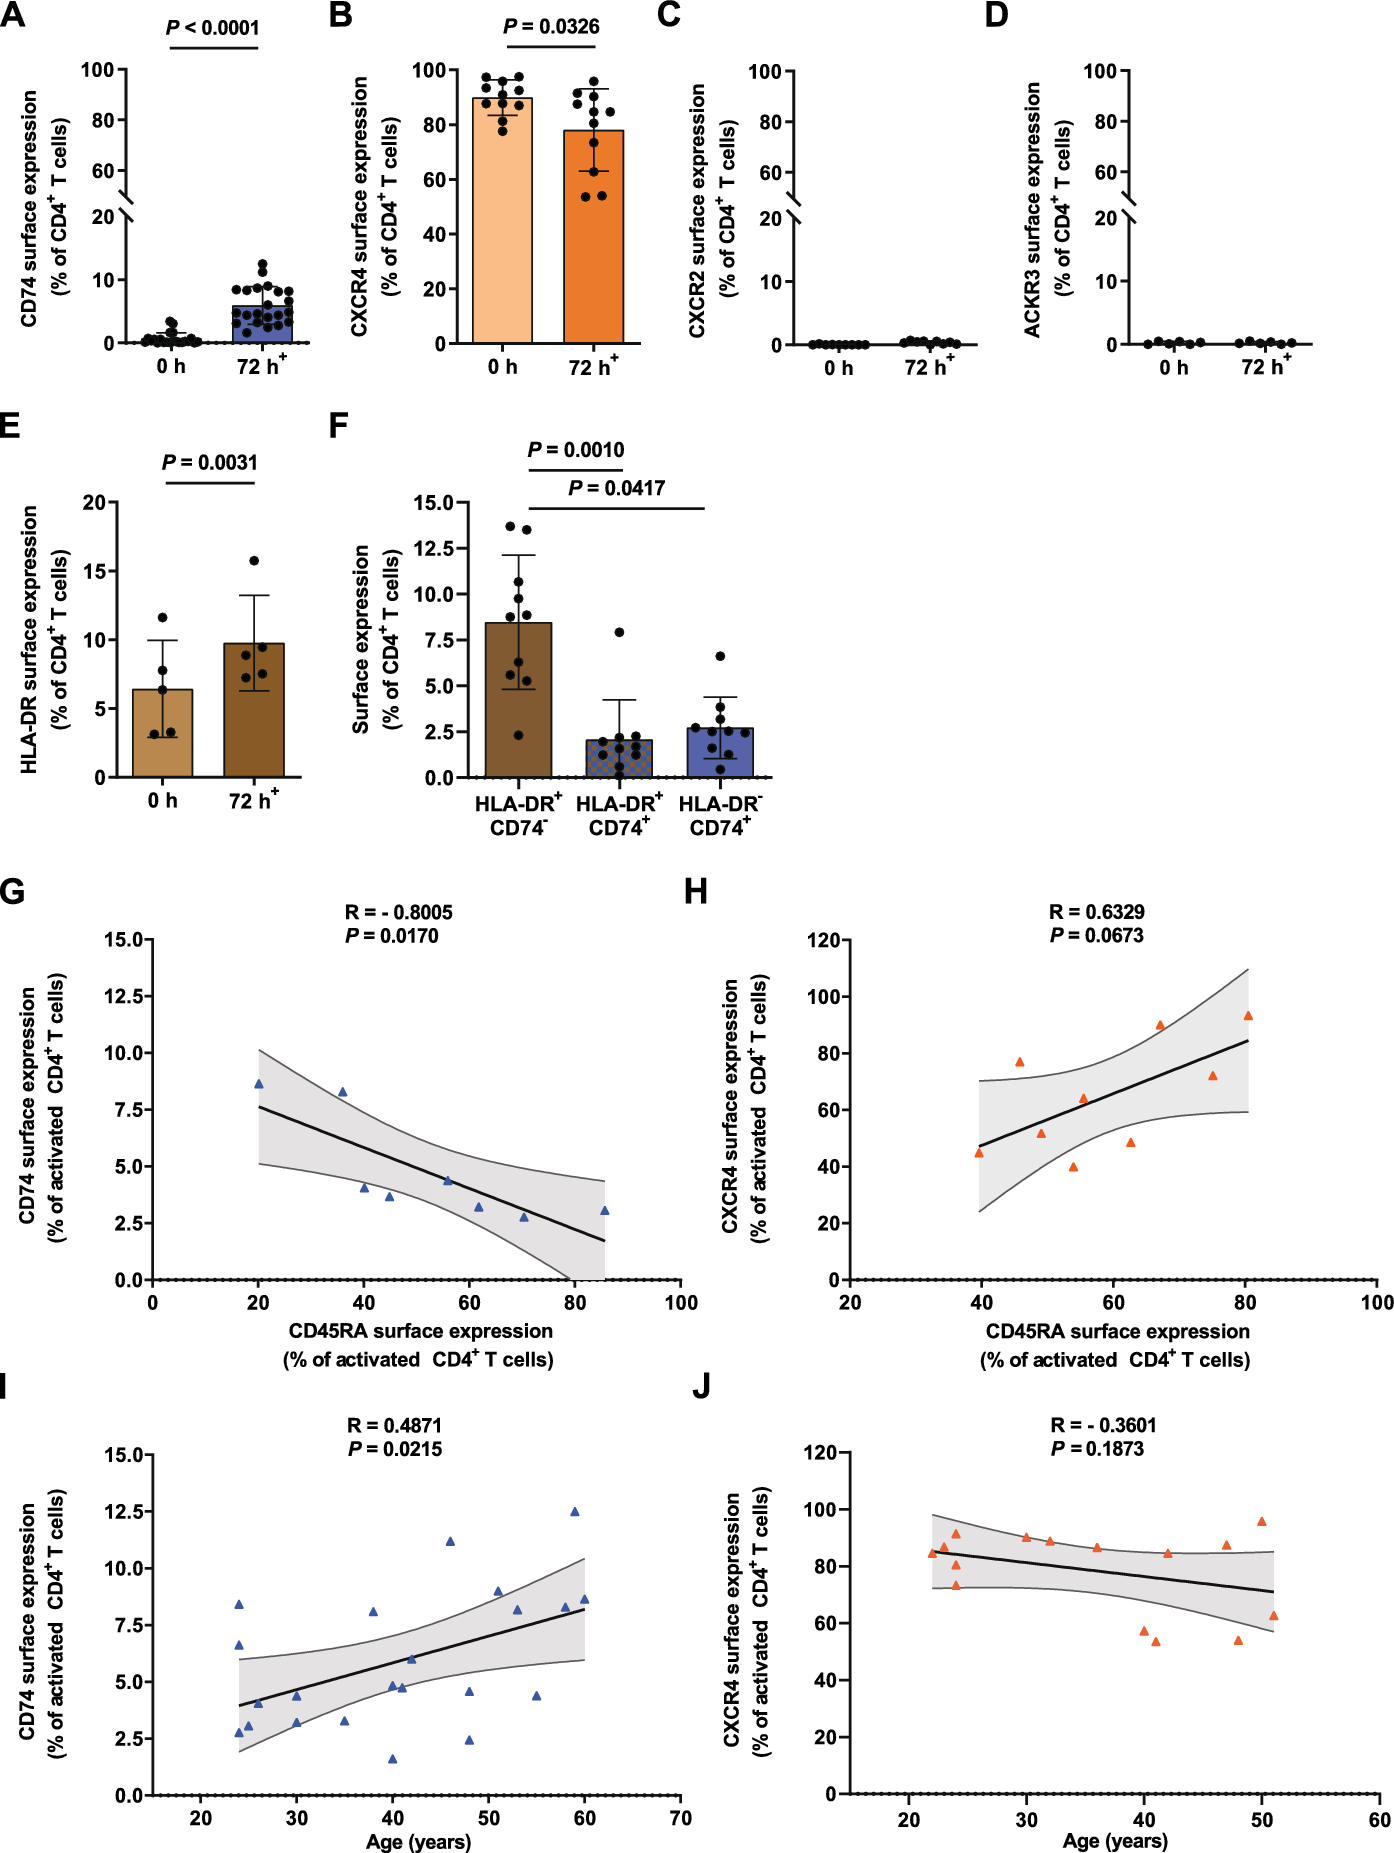 CD74 is a functional MIF receptor on activated CD4+ T cells